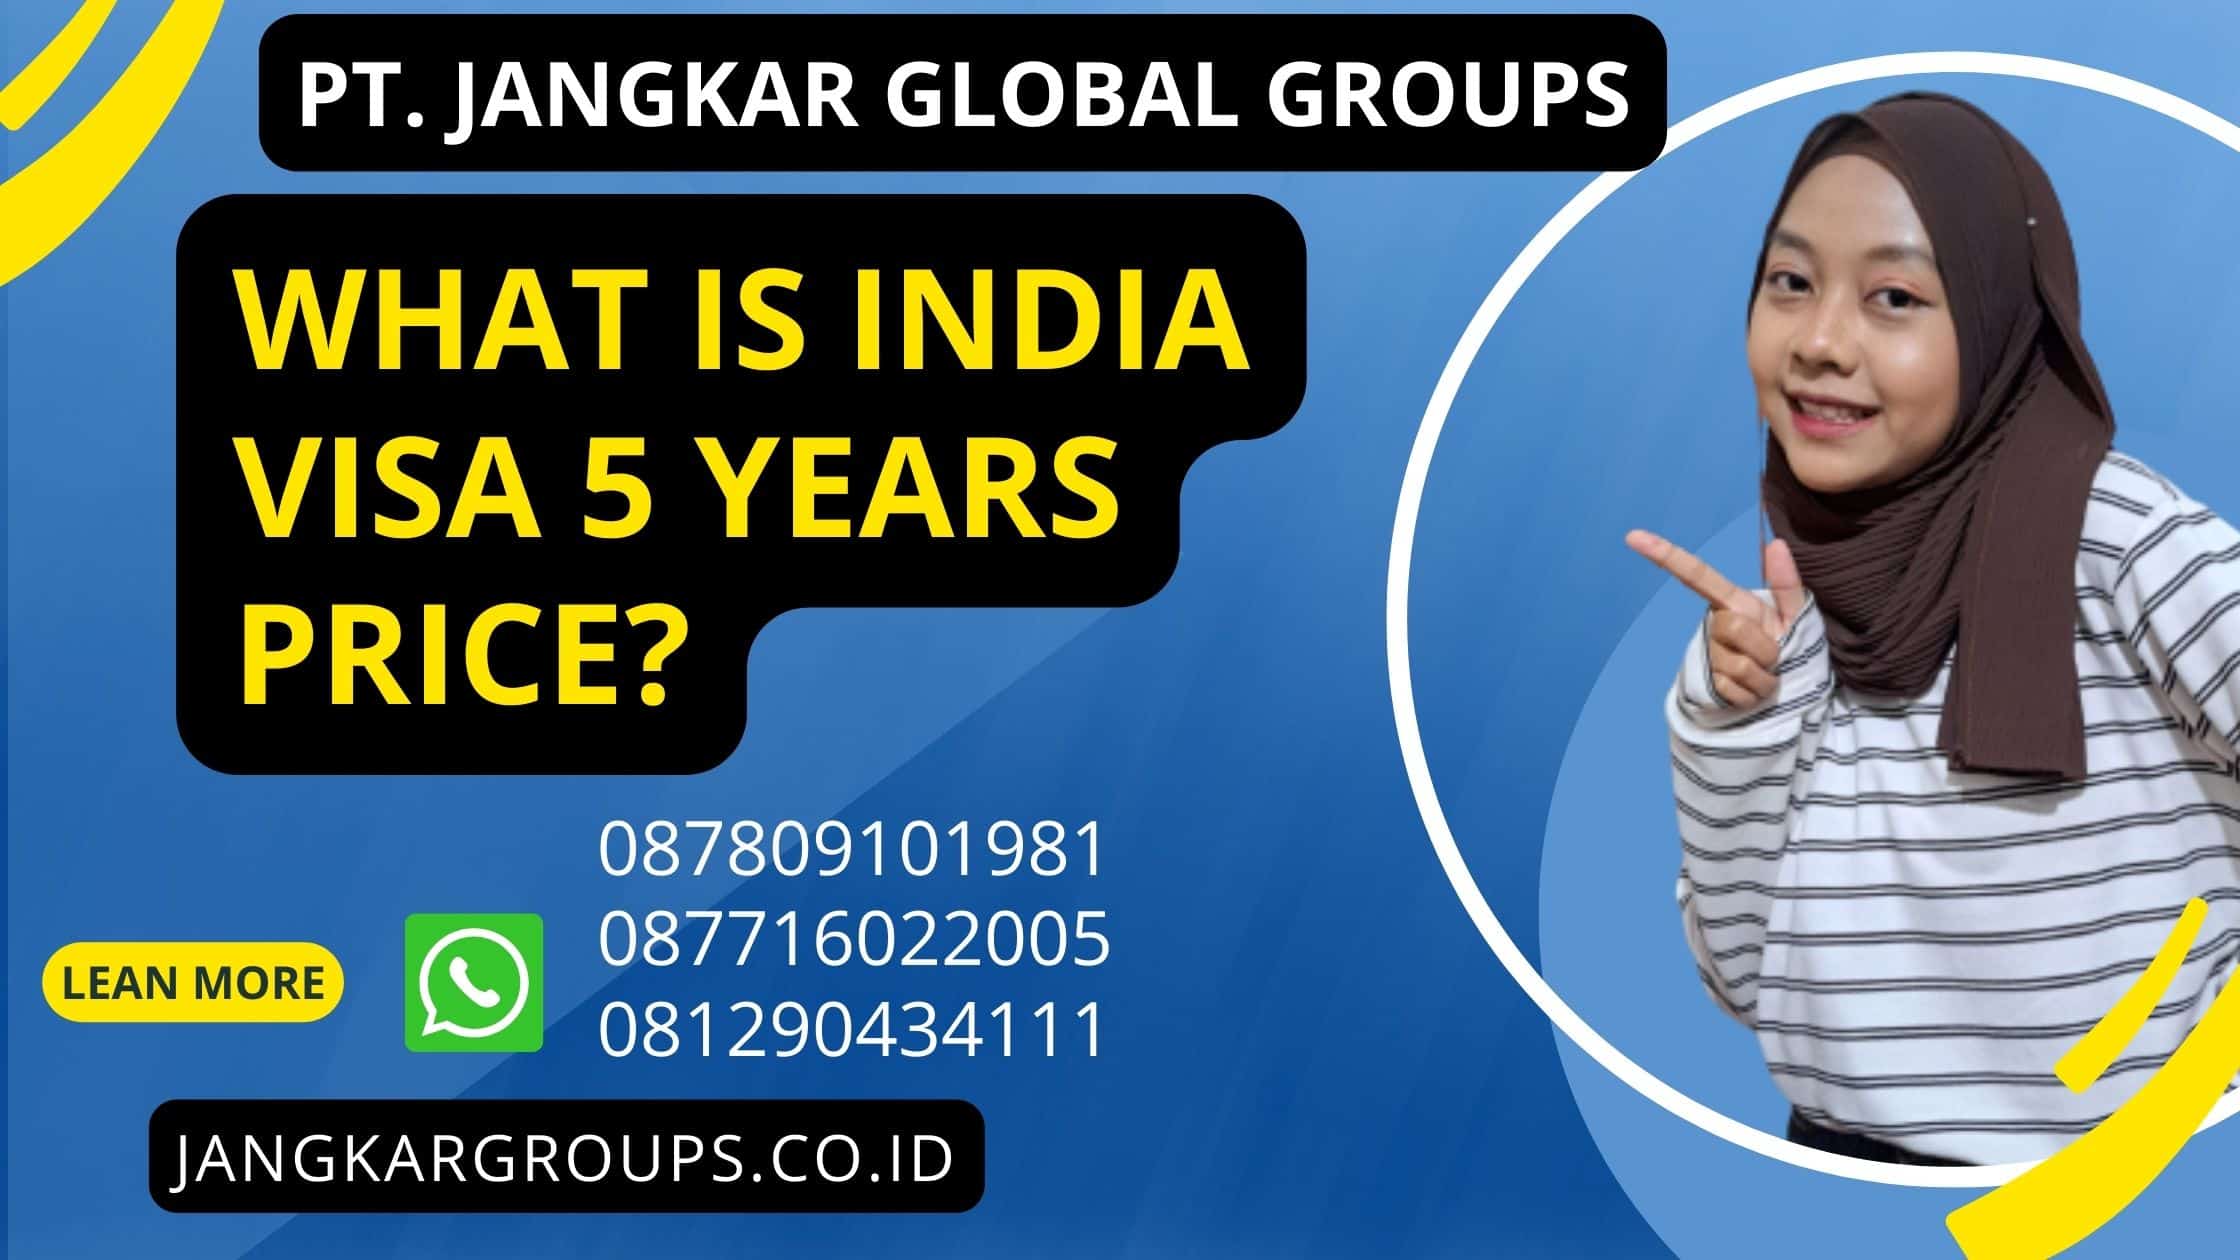 What is India Visa 5 Years Price?